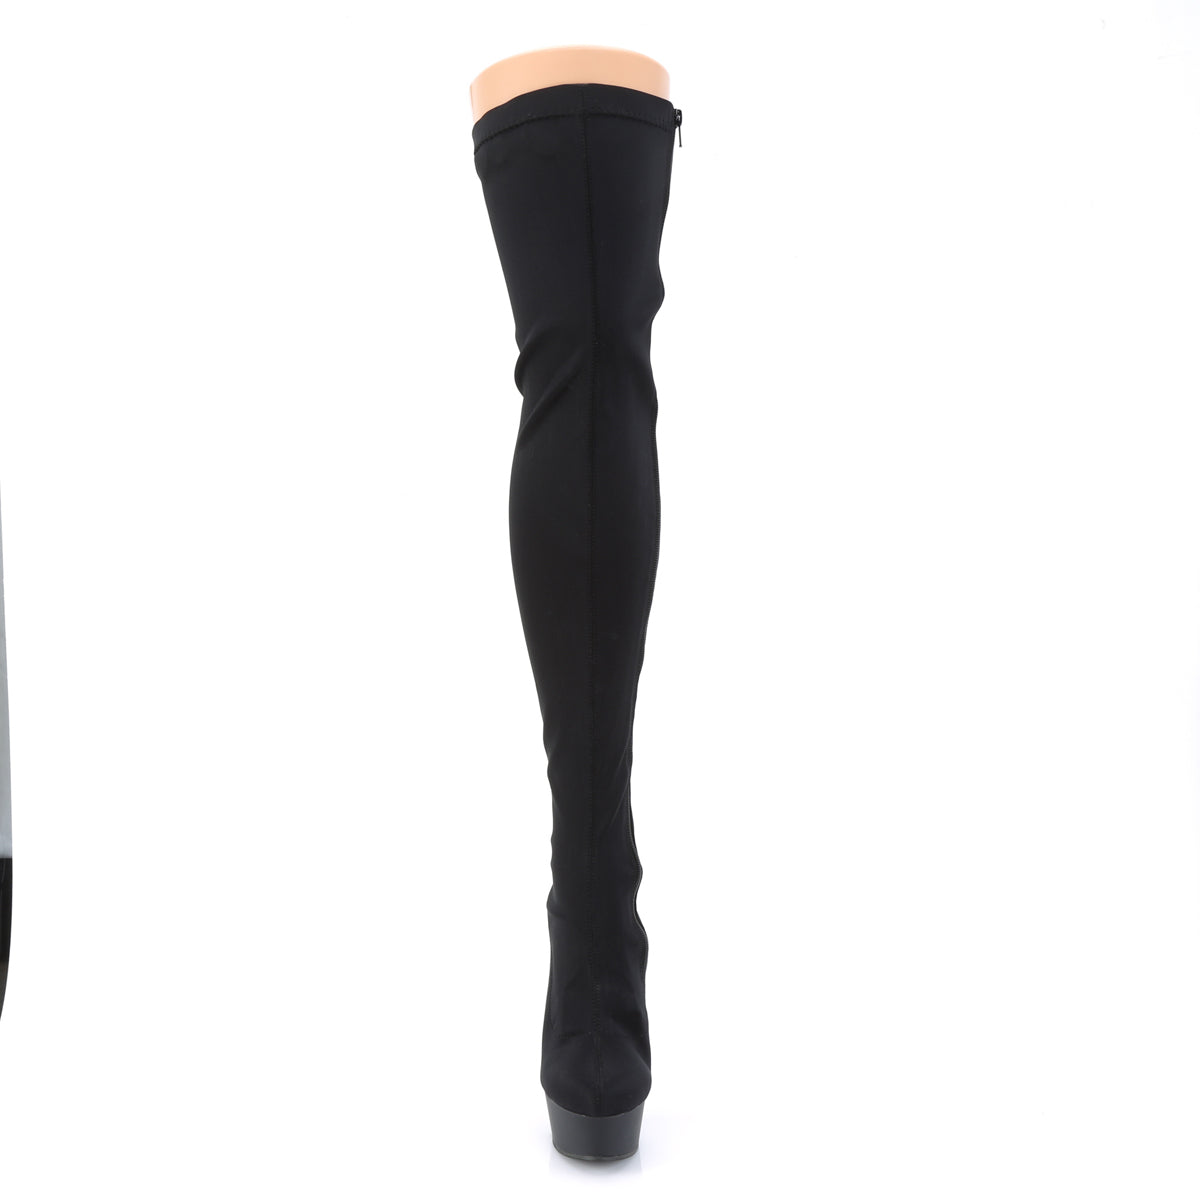 DELIGHT-3003 Black Thigh High Boots